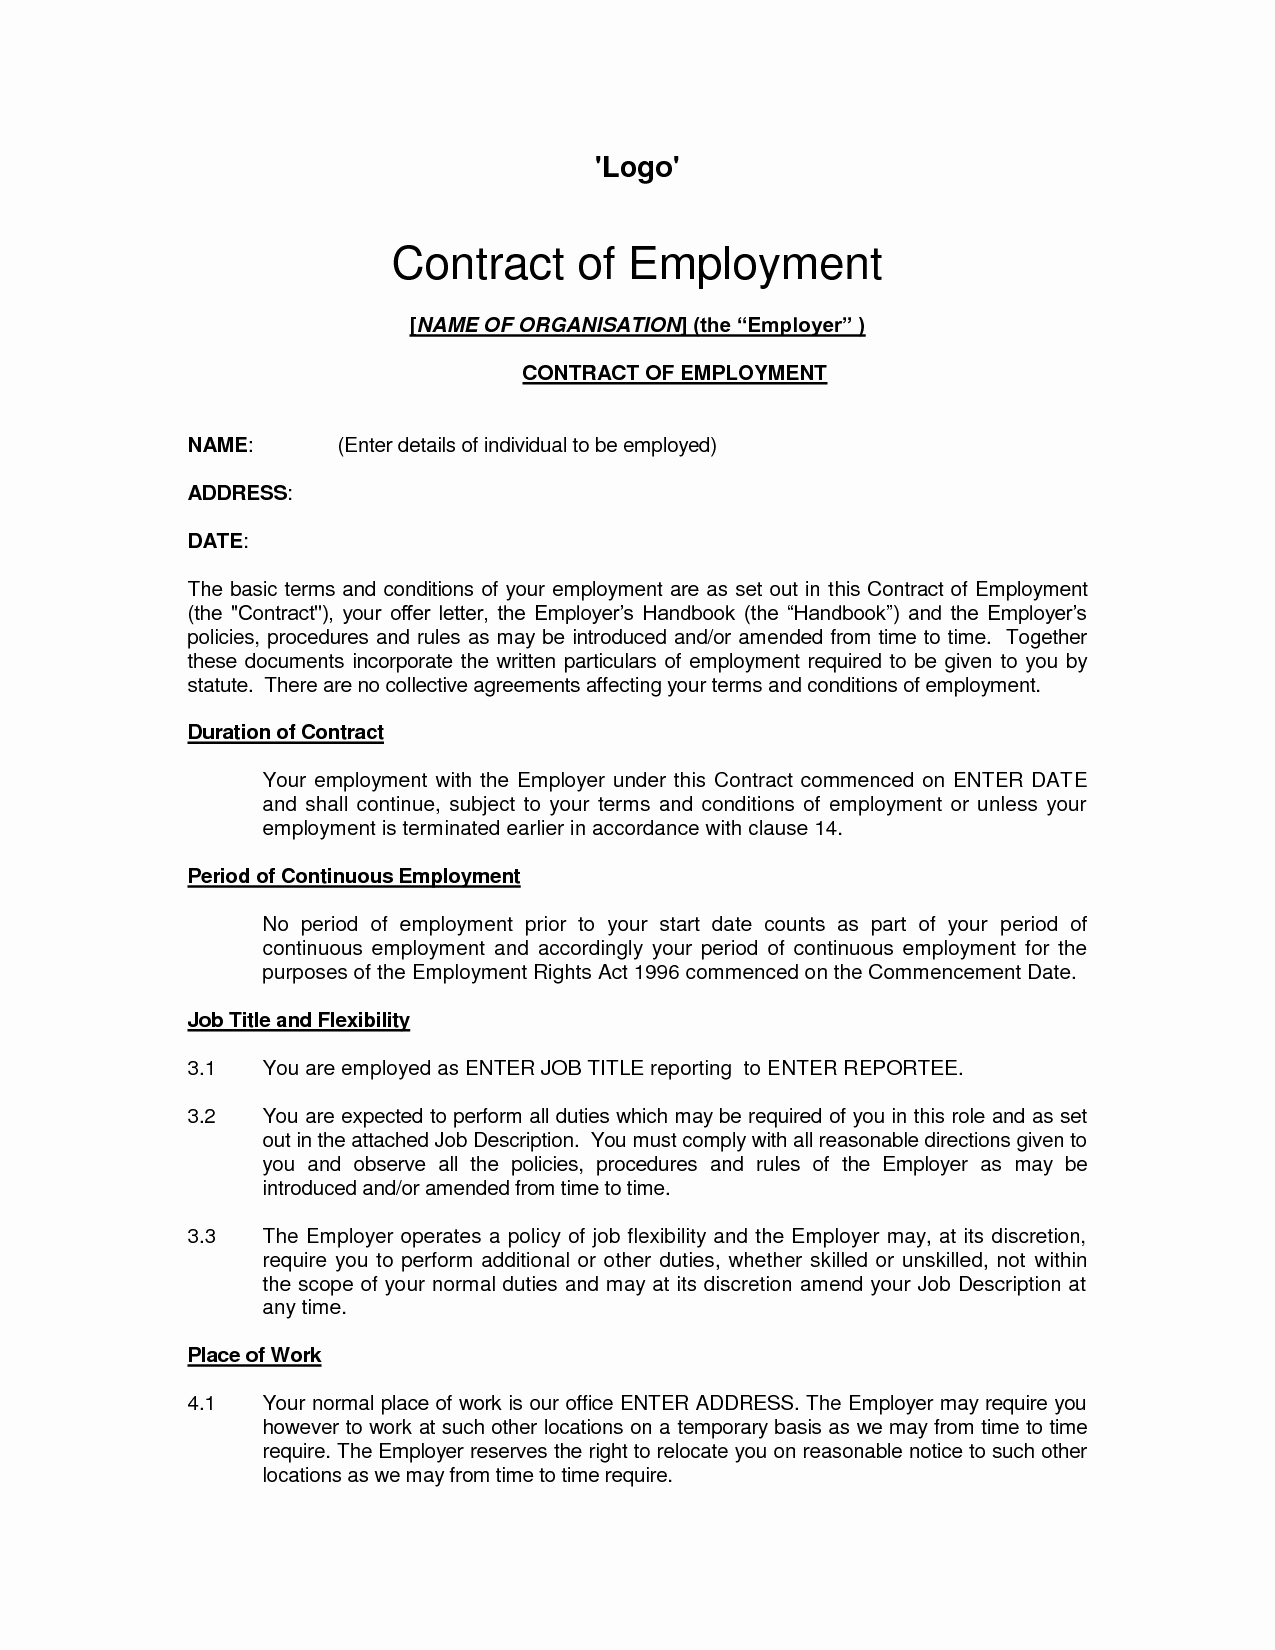 Contract Of Employment Template Awesome Free Printable Employment Contract Sample form Generic